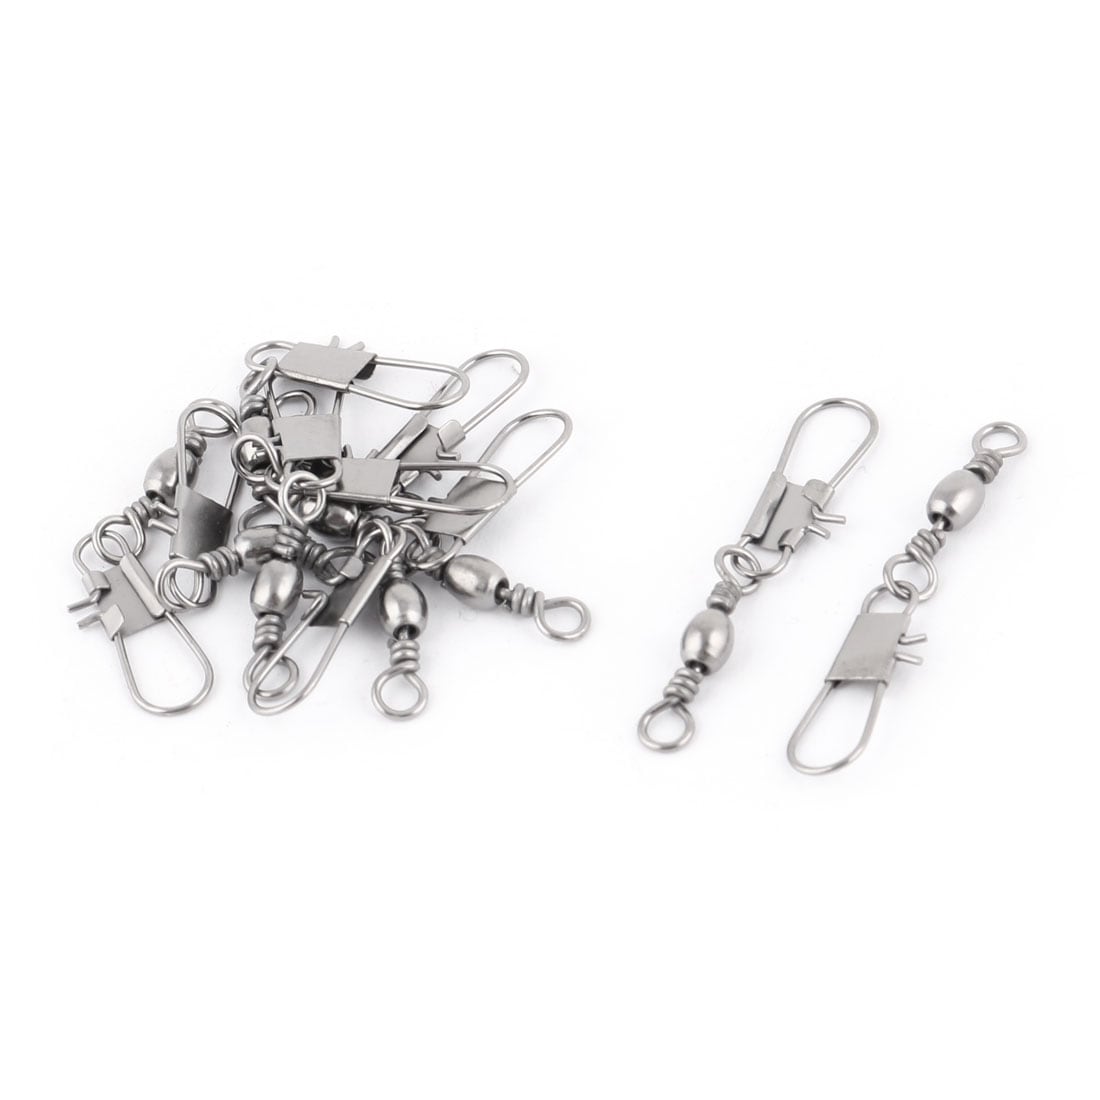 https://ak1.ostkcdn.com/images/products/is/images/direct/5c6bba6046c21860007bc99273d59700deb4c09e/Unique-Bargains-7%23-Fishing-Tackle-Metal-Line-to-Hook-Clip-Connector-Swivel-10-Pcs.jpg